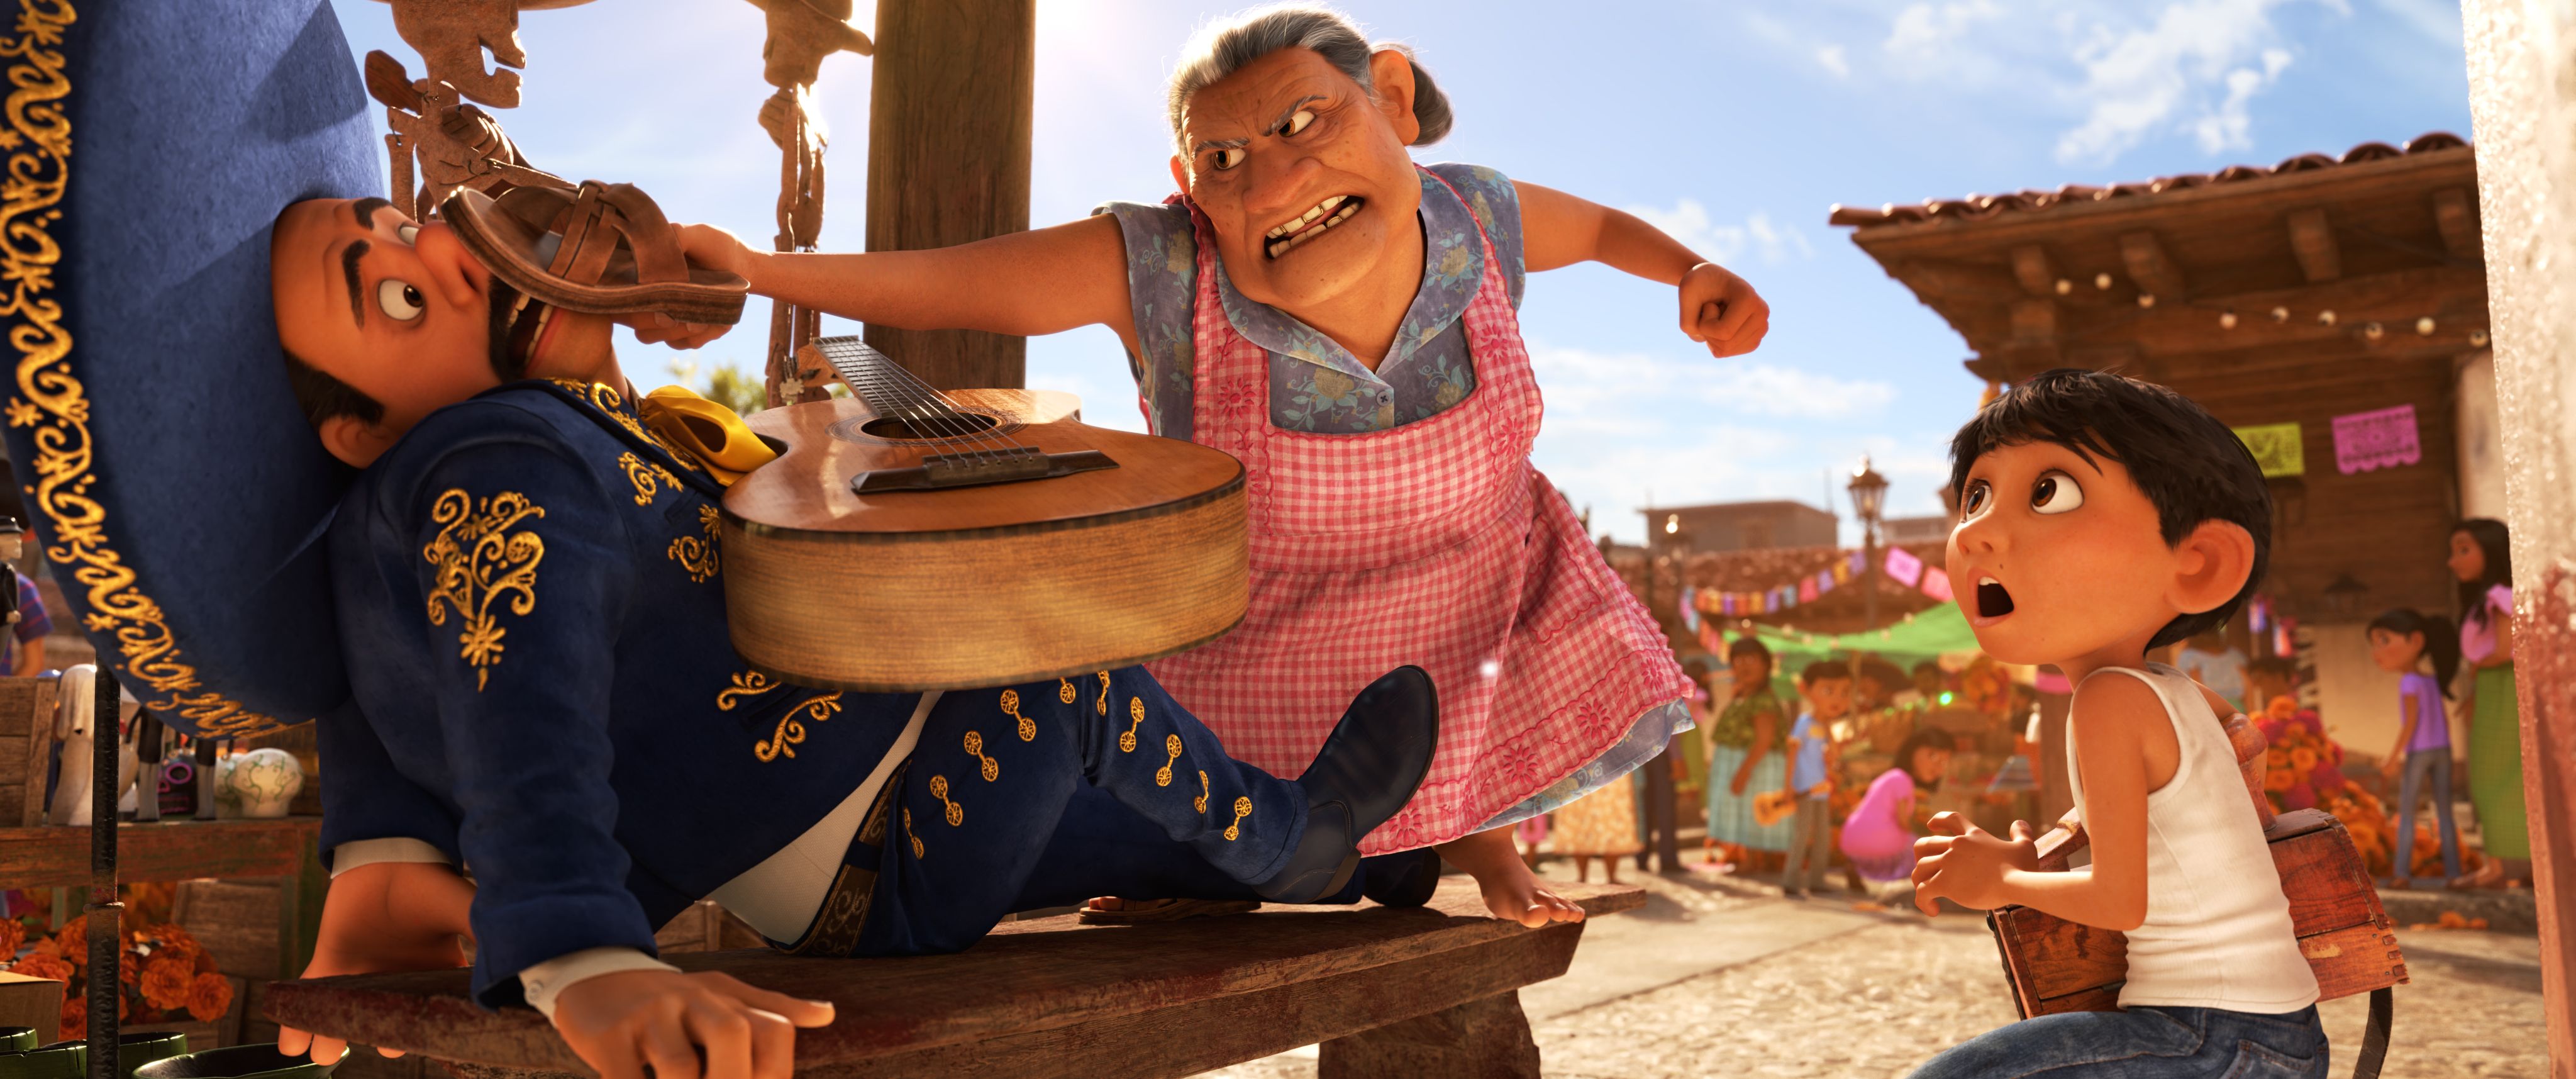 The Real Talent 25 Things Pixar Does That Disney Would Never Do